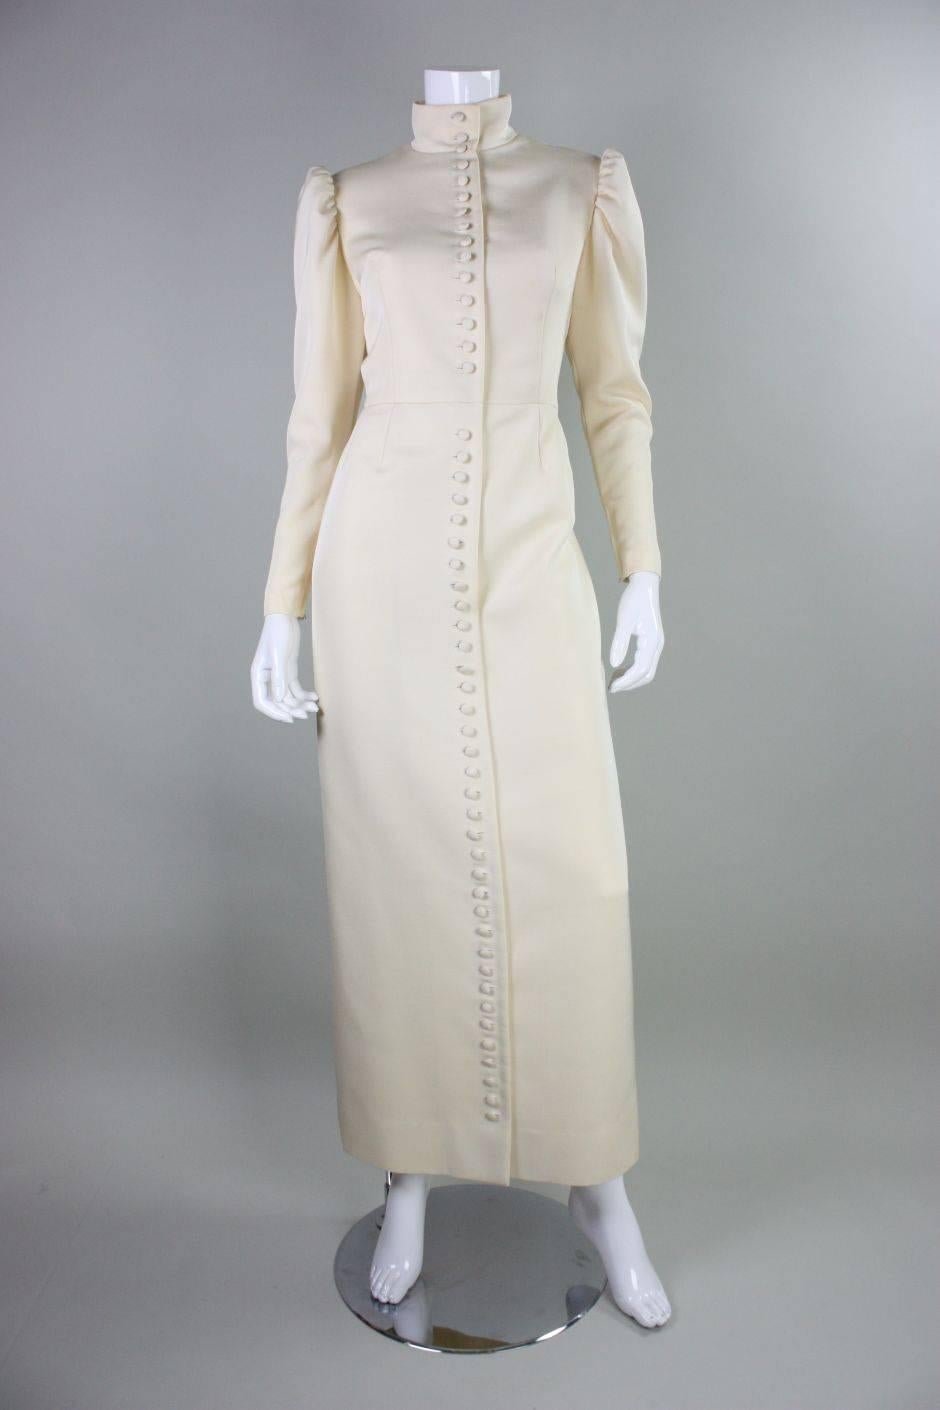 Vintage evening gown from Lanvin dates to the 1970's and is made of cream-colored faille, possibly synthetic or a synthetic blend.  It features a mock neck, center front covered button closures, and a slight leg of mutton sleeve with zippered cuff. 